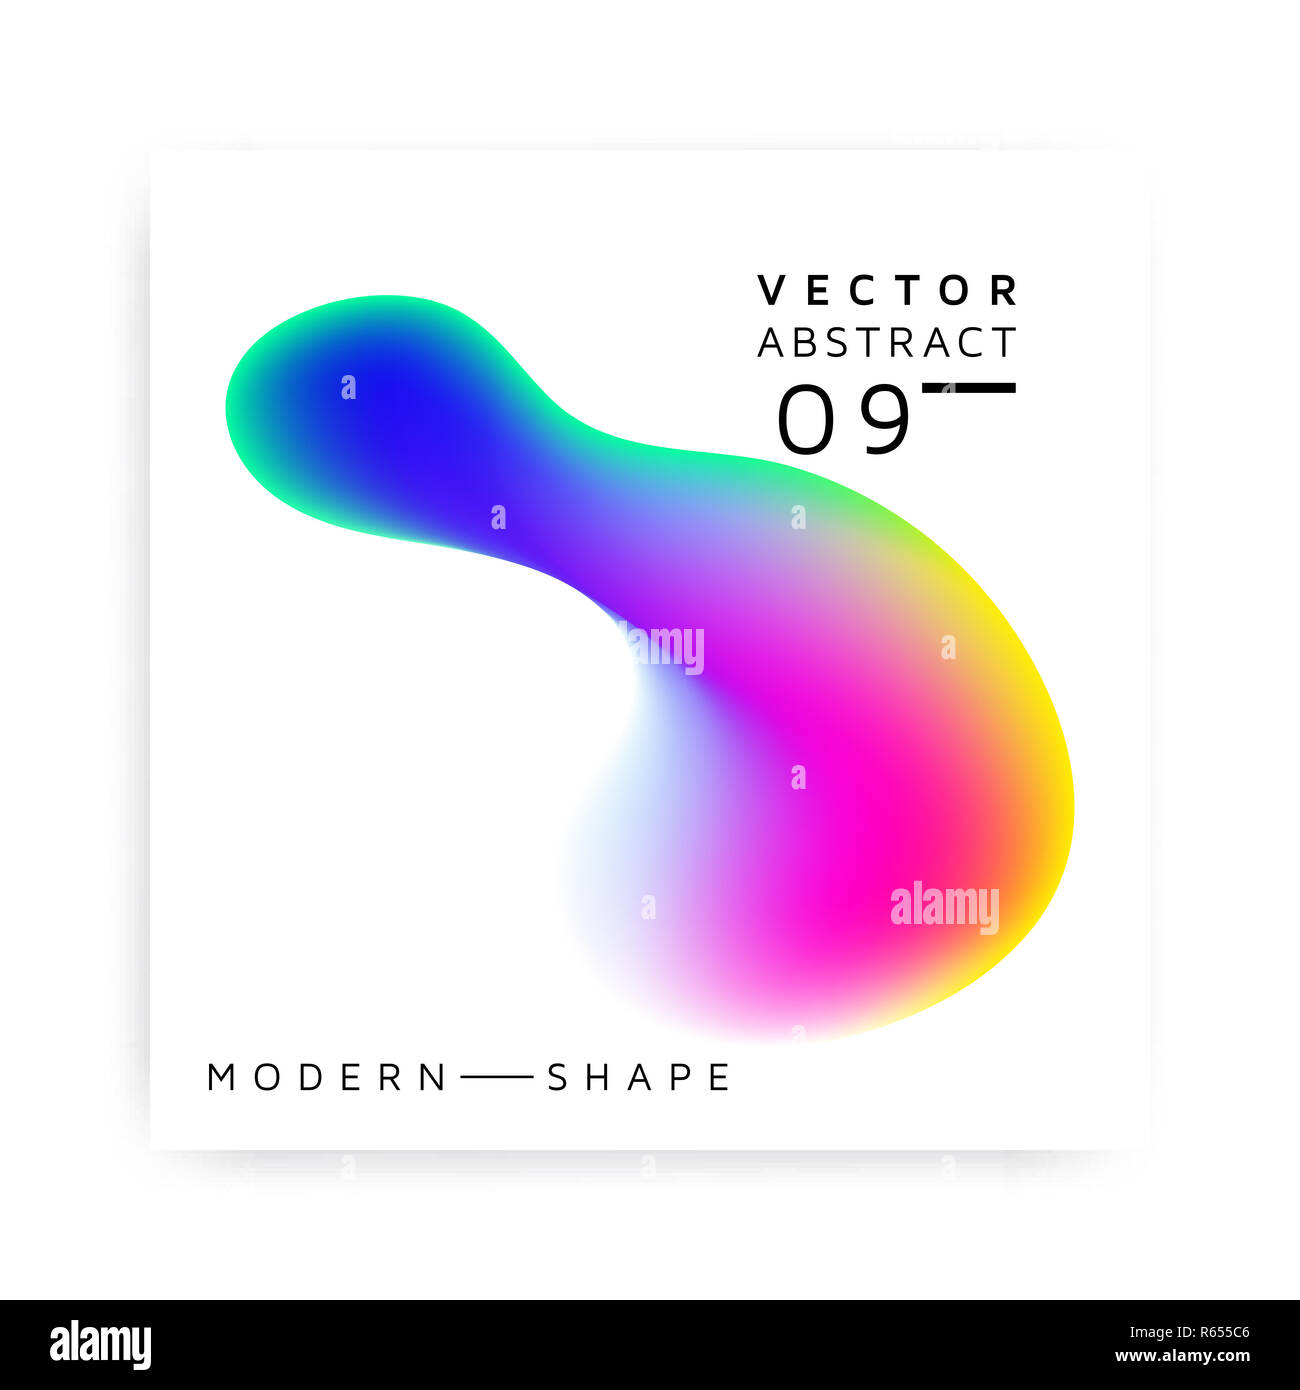 Abstract vector modern colorful shape Stock Photo